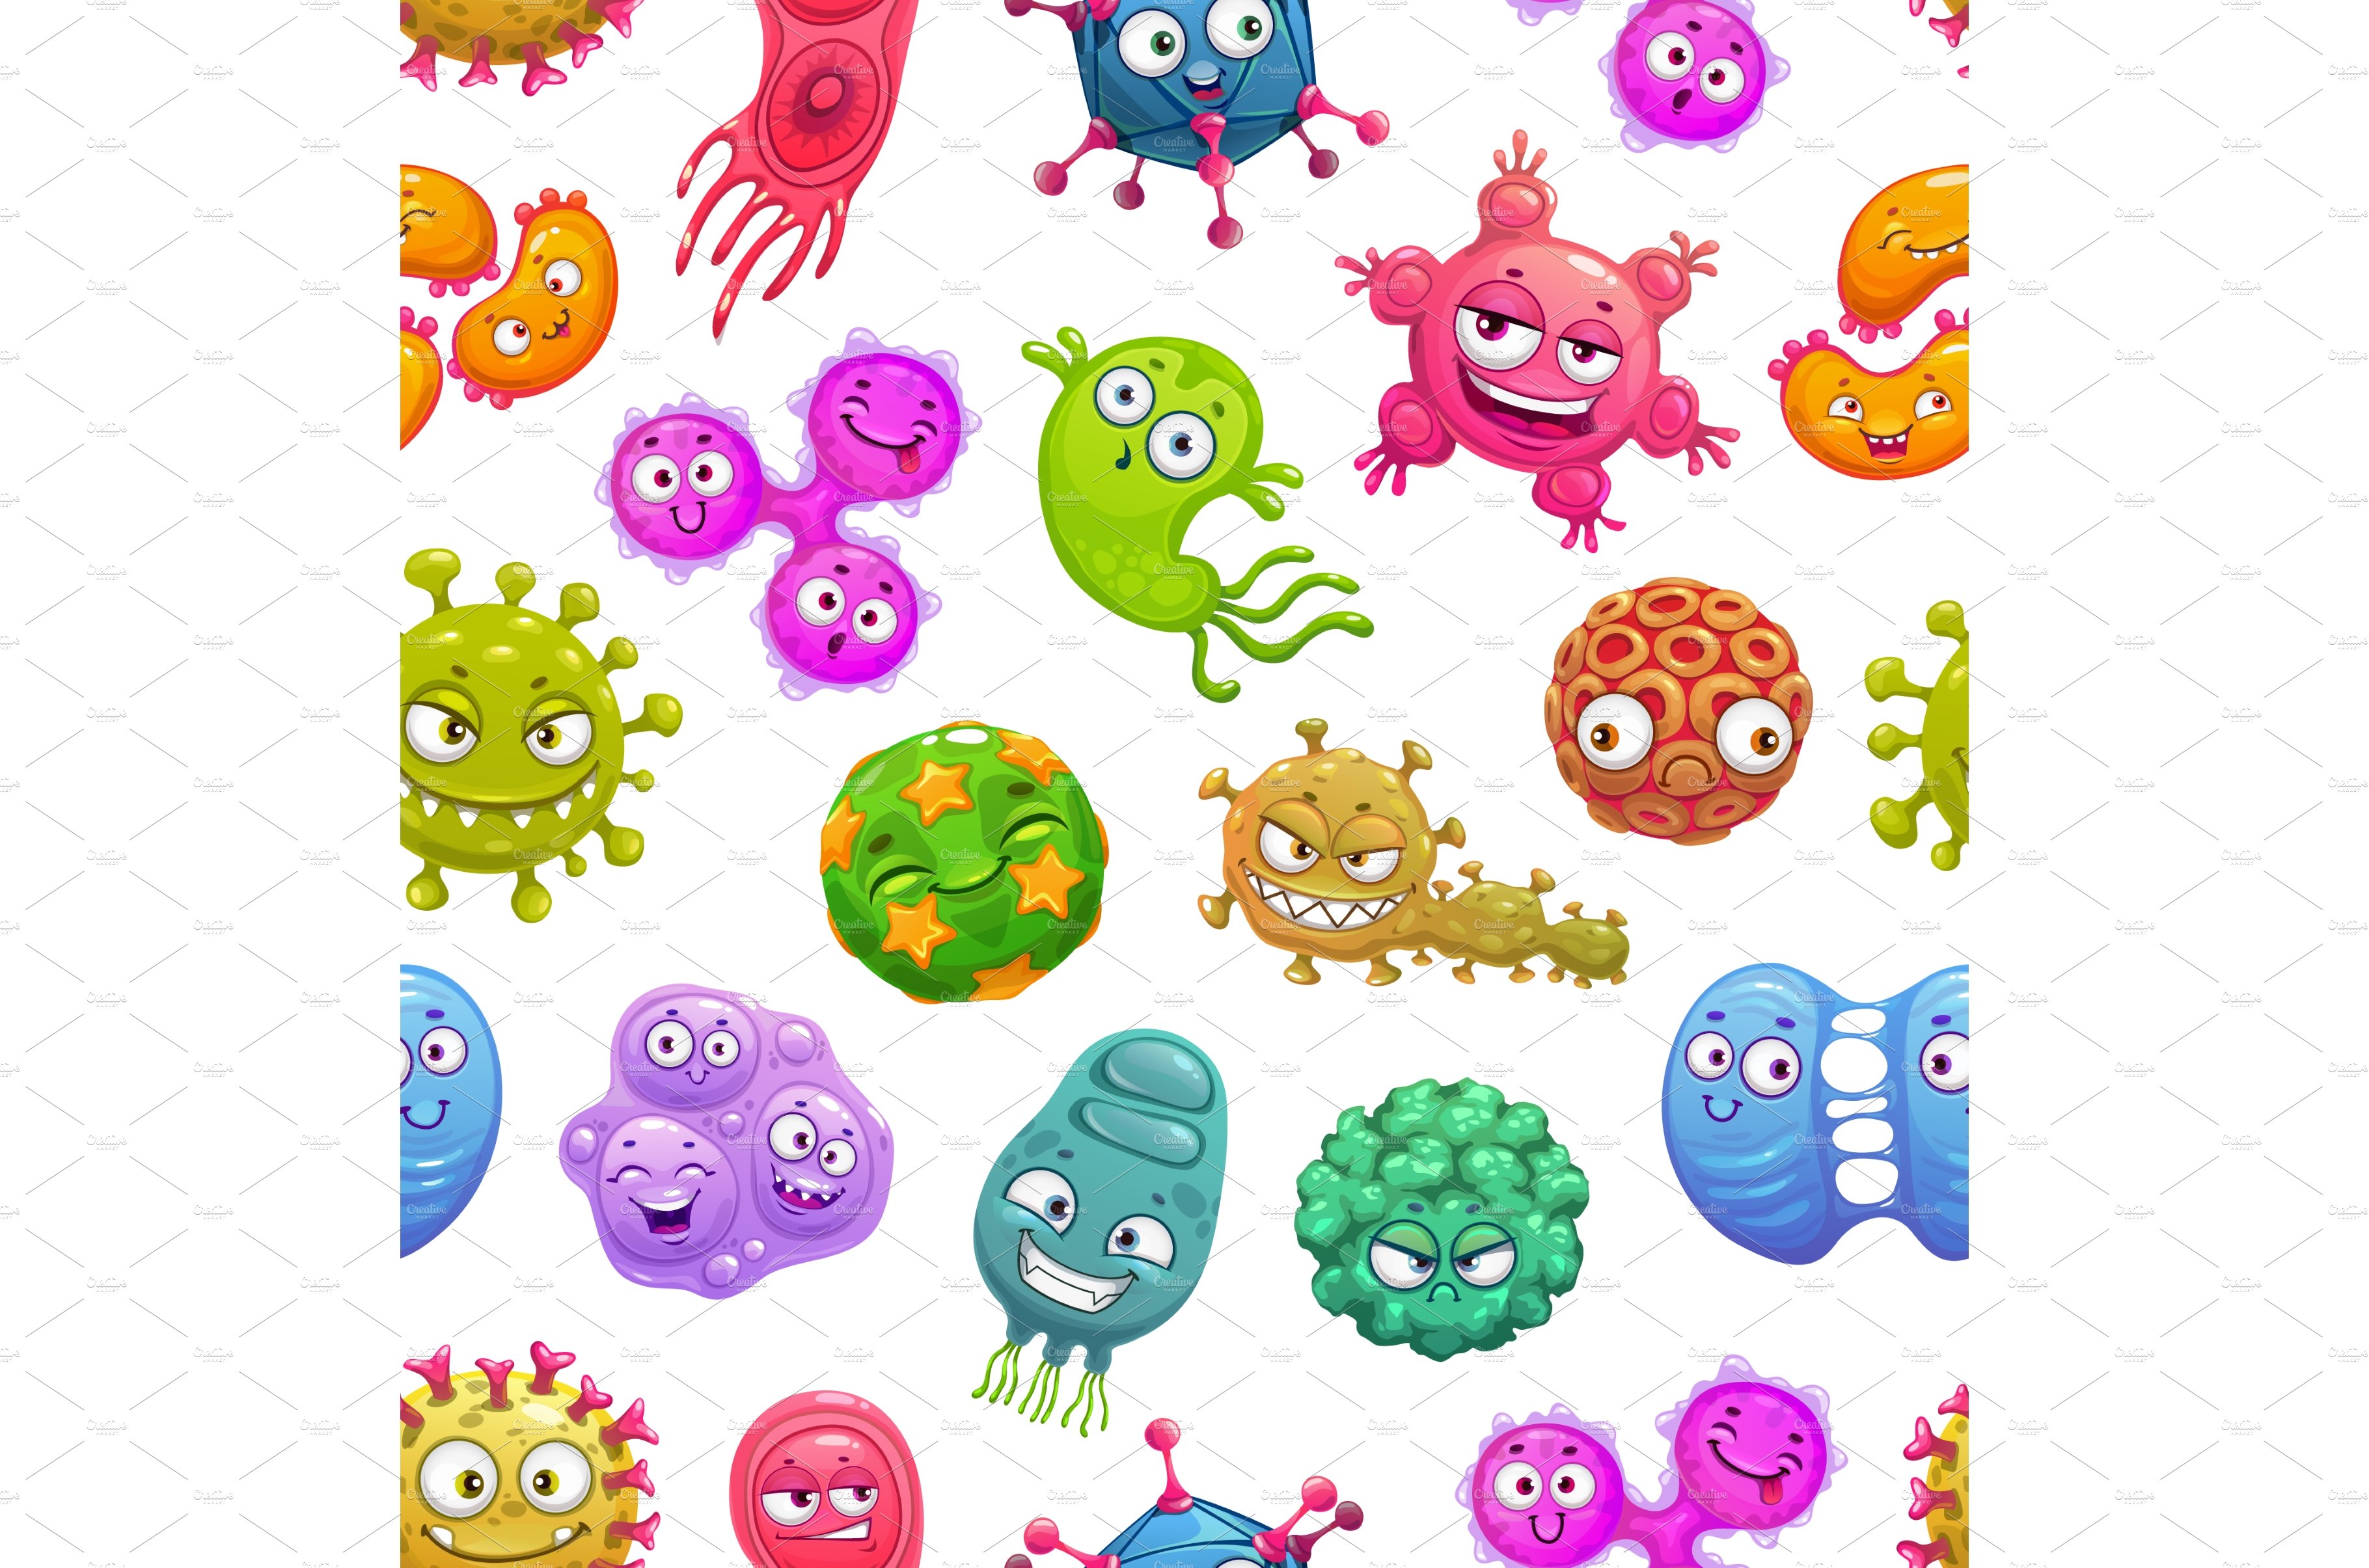 Cartoon funny viruses pattern cover image.